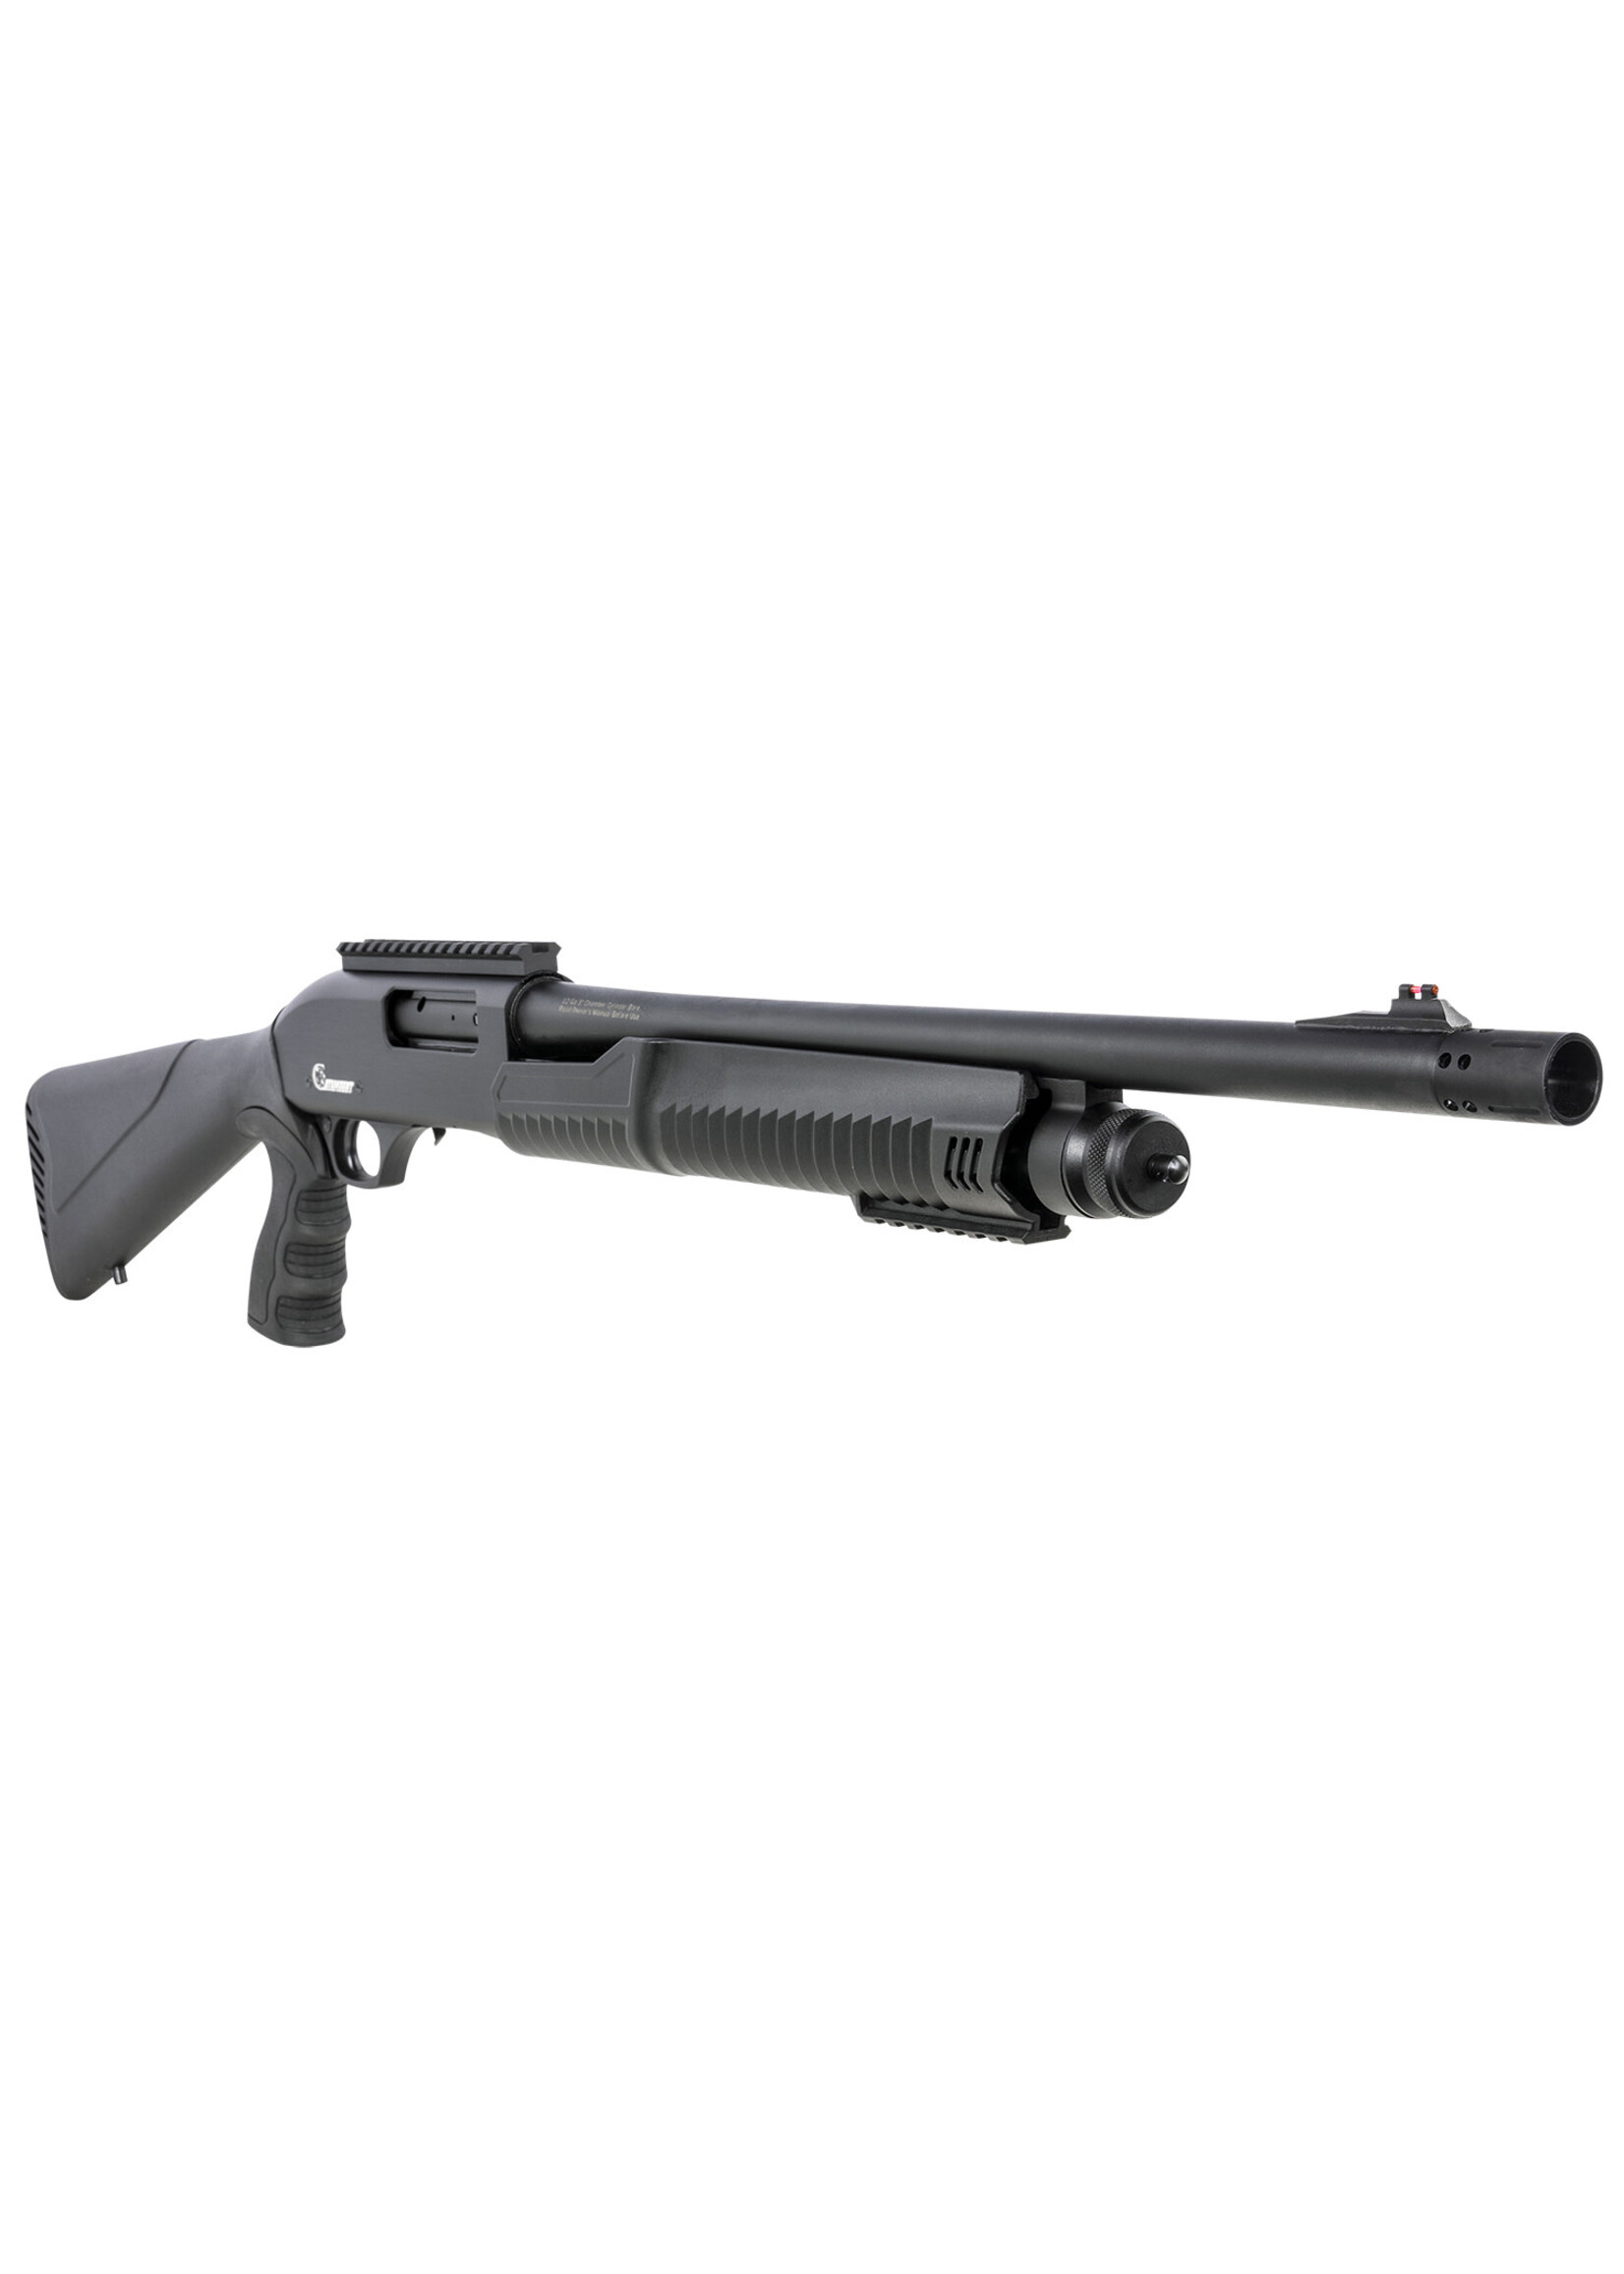 Century Arms Century Arms SG2118N Catamount Lynxx 12 Gauge 5+1 (2.75") 3" Chrome Lined Cylinder Bore Barrel, Ported Muzzle, Fiber Optic Front Sight, Synthetic Pistol Grip Stock, Picatinny Optic & Accessory Rails, Includes 3 Chokes (F,M,C)